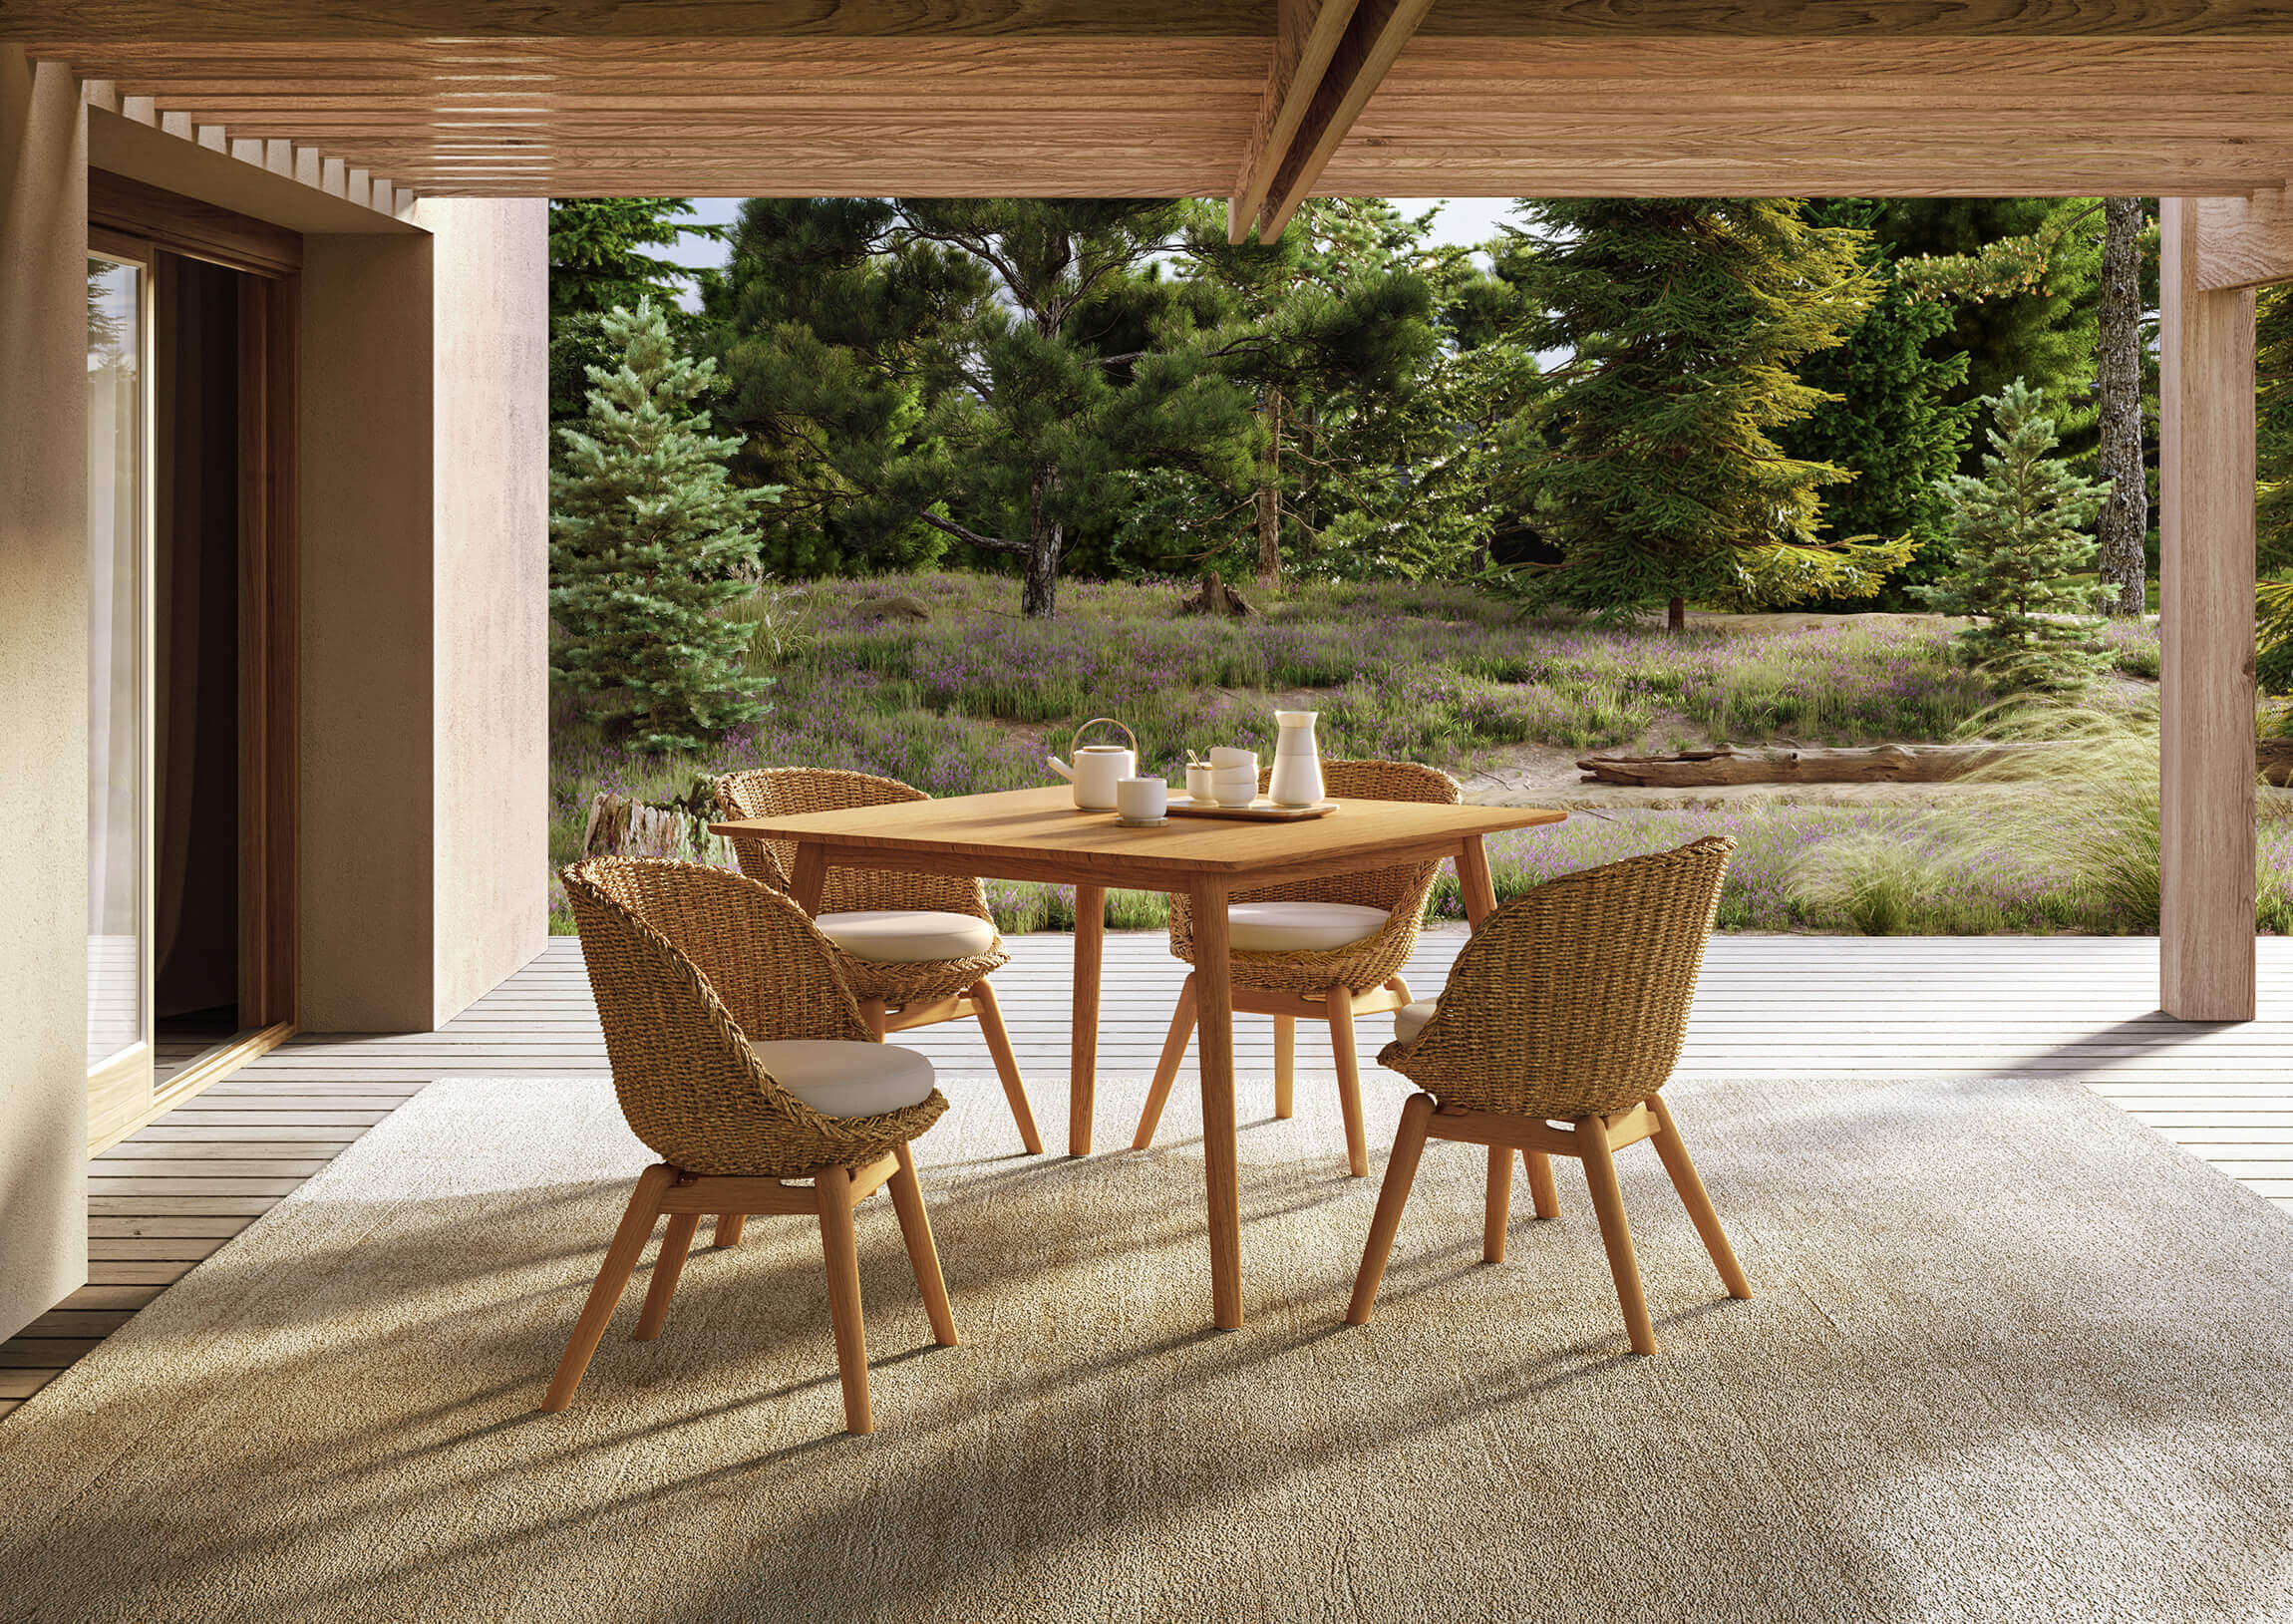 Spring 3D Rendering for a Patio with Outdoor Furniture